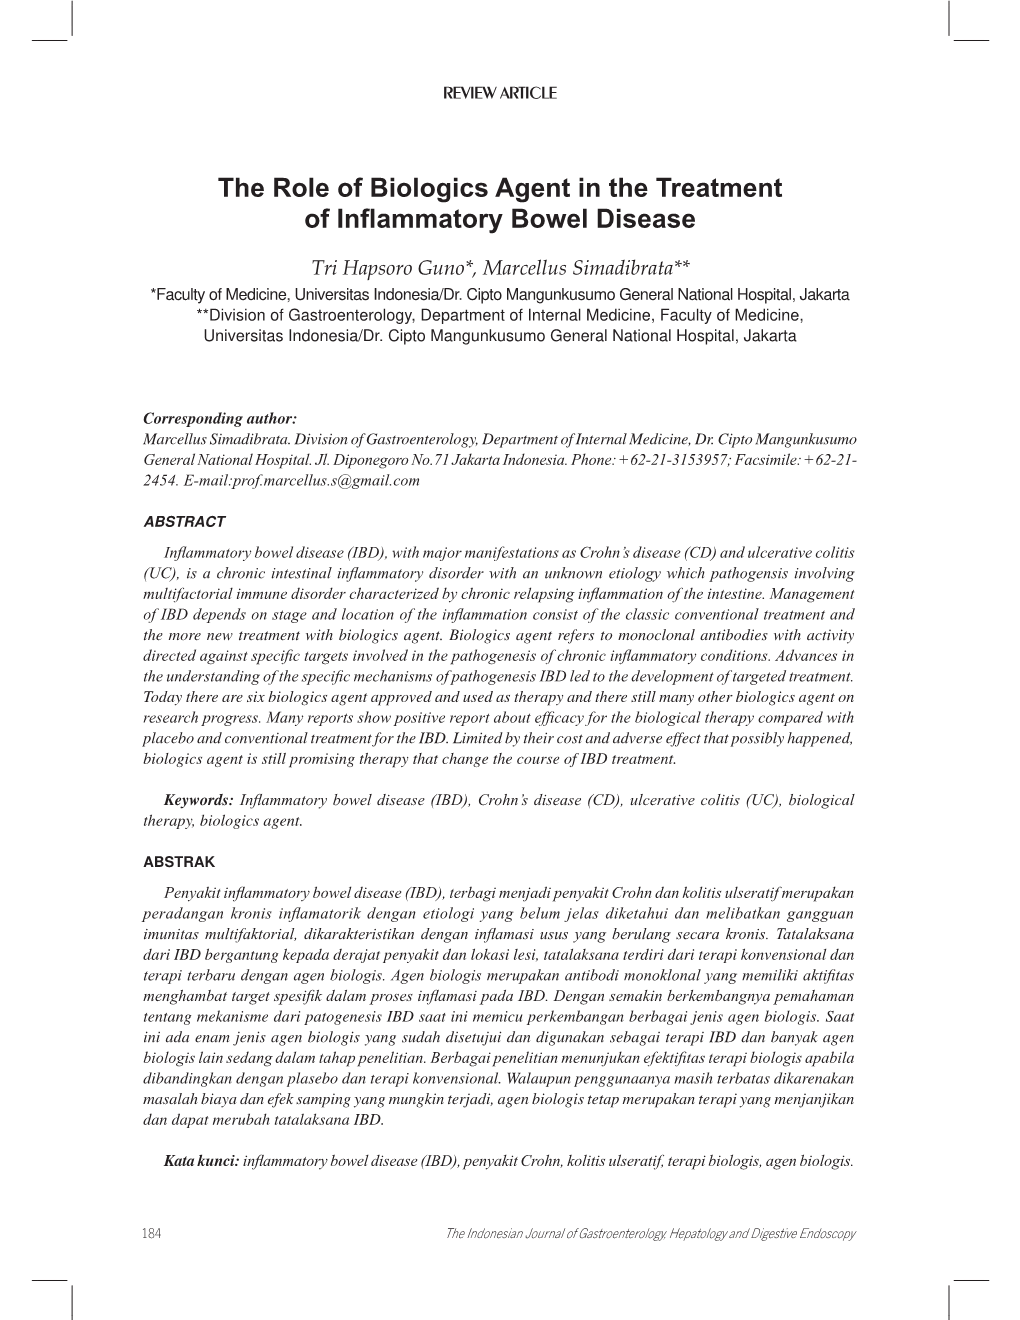 The Role of Biologics Agent in the Treatment of In.Ammatory Bowel